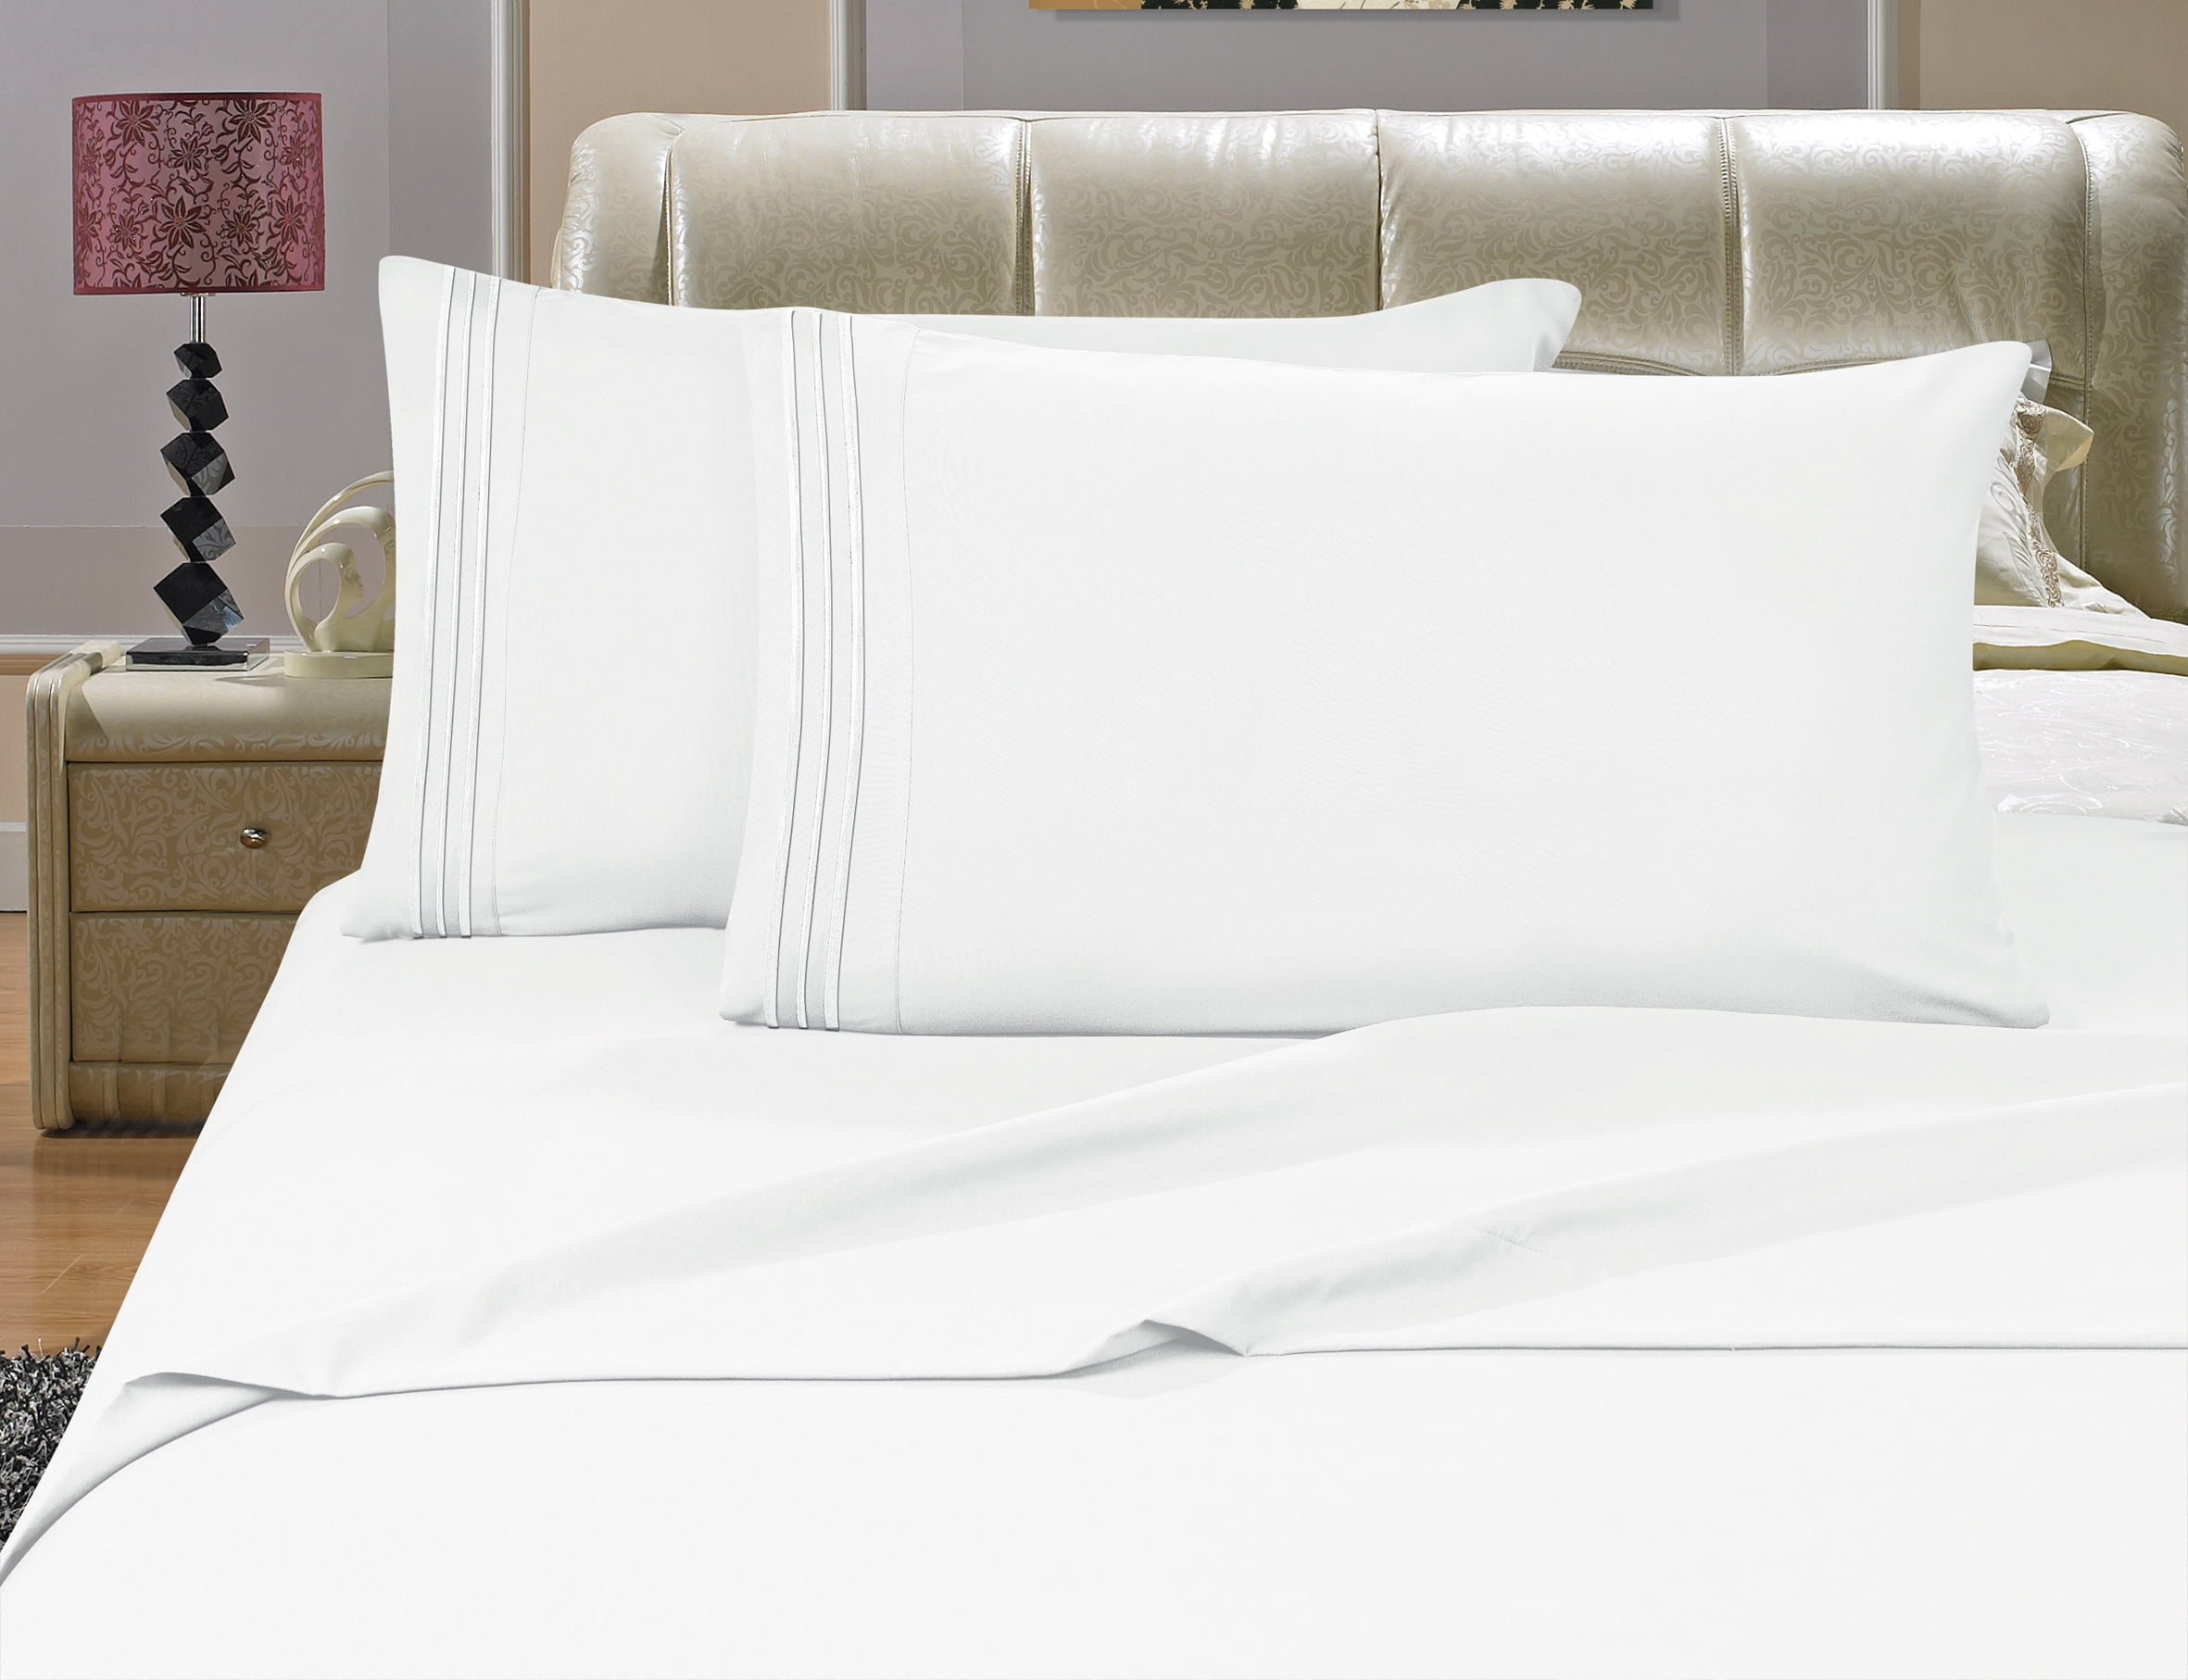 1500 THREAD COUNT EGYPTIAN COTTON PREMIUM BED SHEET SET WHITE SOLID ALL SIZES 